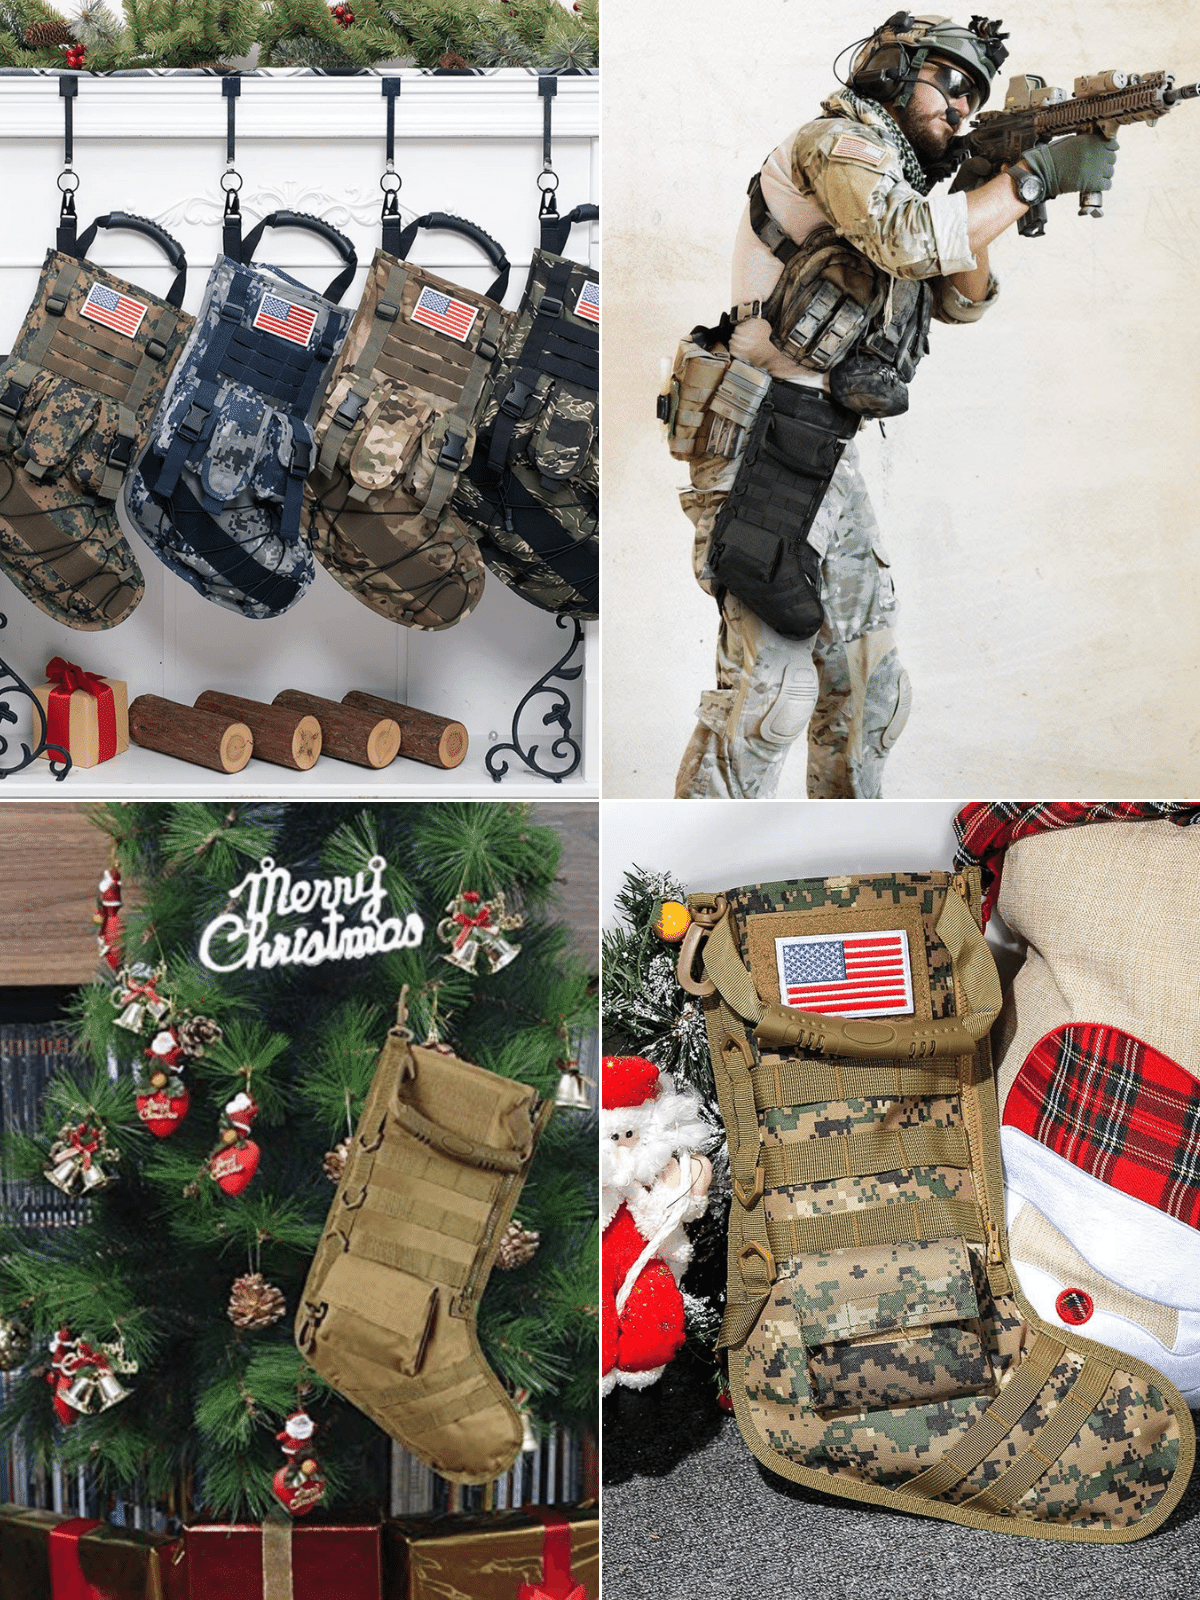 4 pictures of MOLLE Camo Christmas stockings, 1 on the tree, 1 under the tree, 4 on the mantle and 1 on a soldier